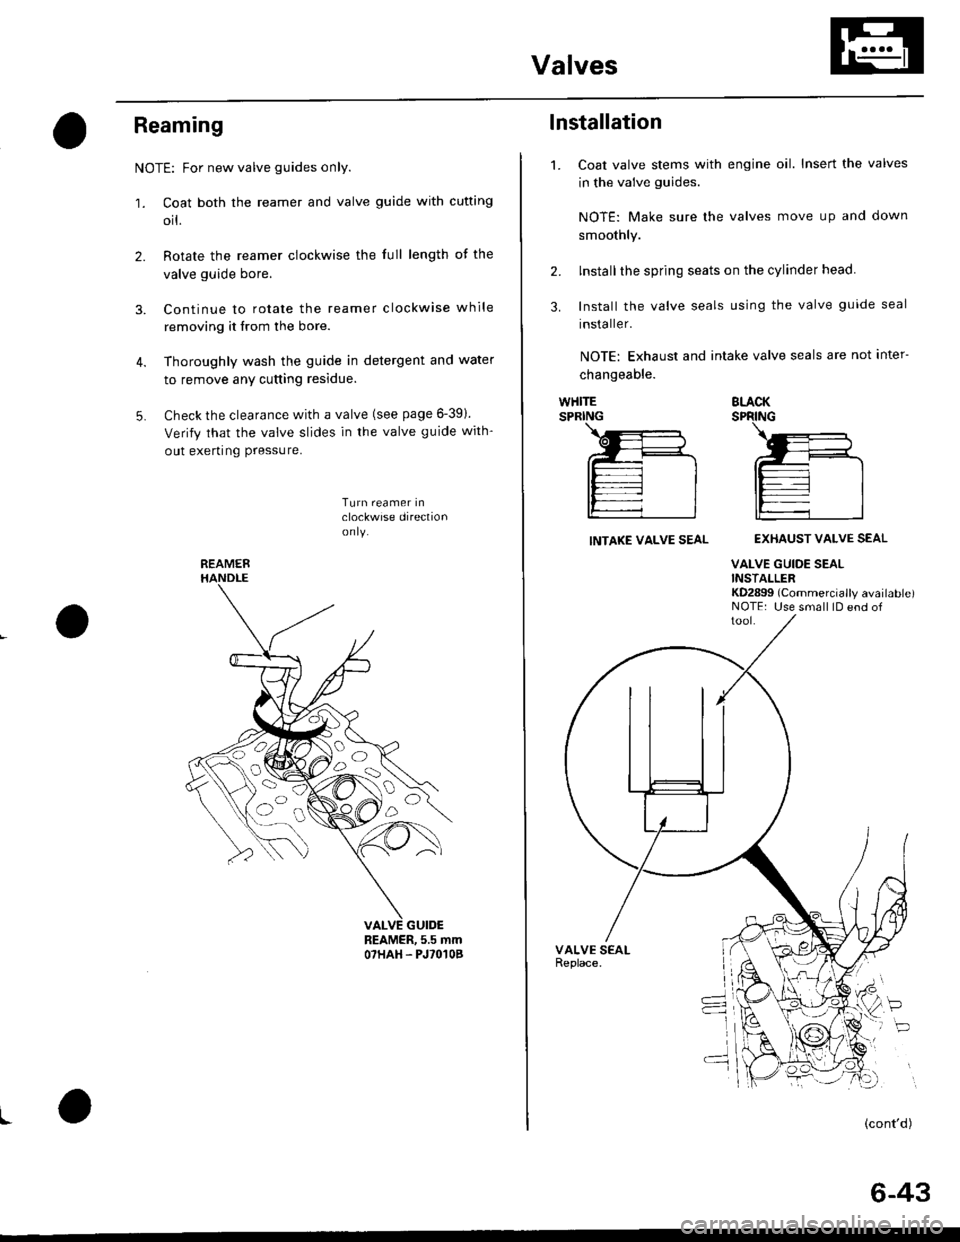 HONDA CIVIC 1997 6.G Workshop Manual Valves
Reaming
NOTE: For new valve guides only.
1. Coat both the reamer and valve guide with cufting
orl.
2. Rotate the reamer clockwise the full length of the
valve guide bore.
3. Continue to rotate 